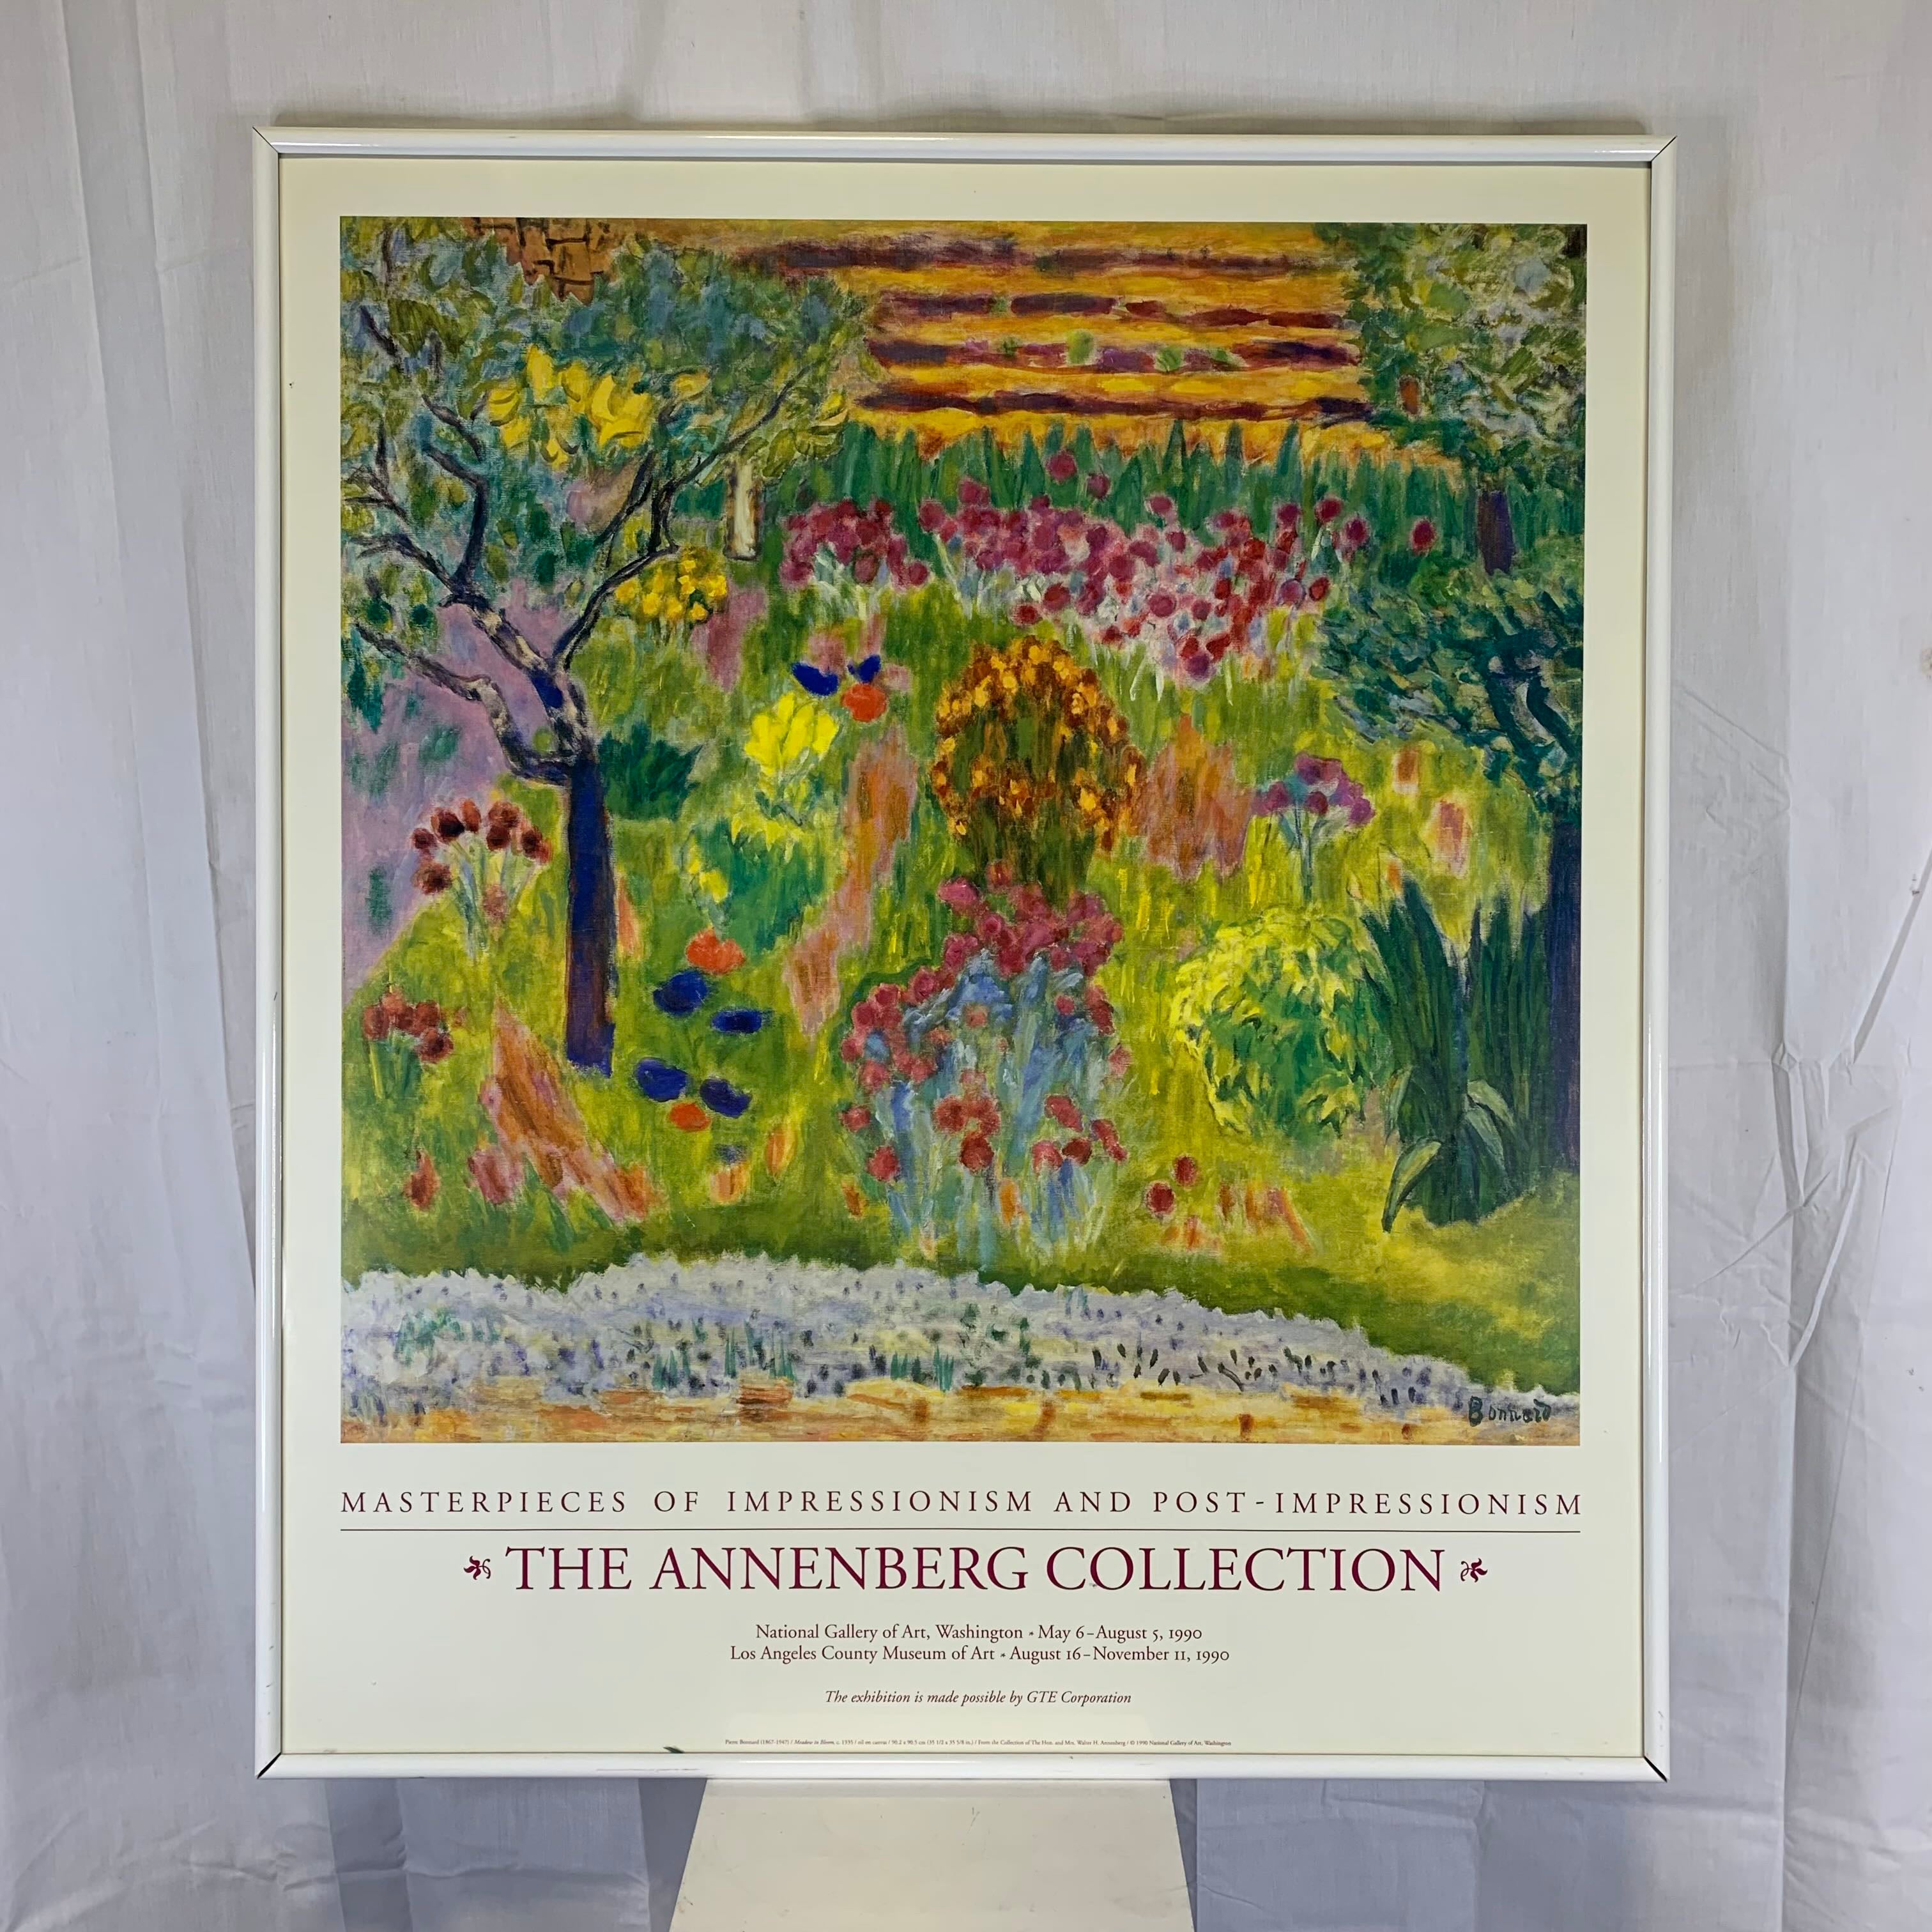 37"x 43" The Annenberg Collection from the National Gallery of Art Washington Framed Poster Print